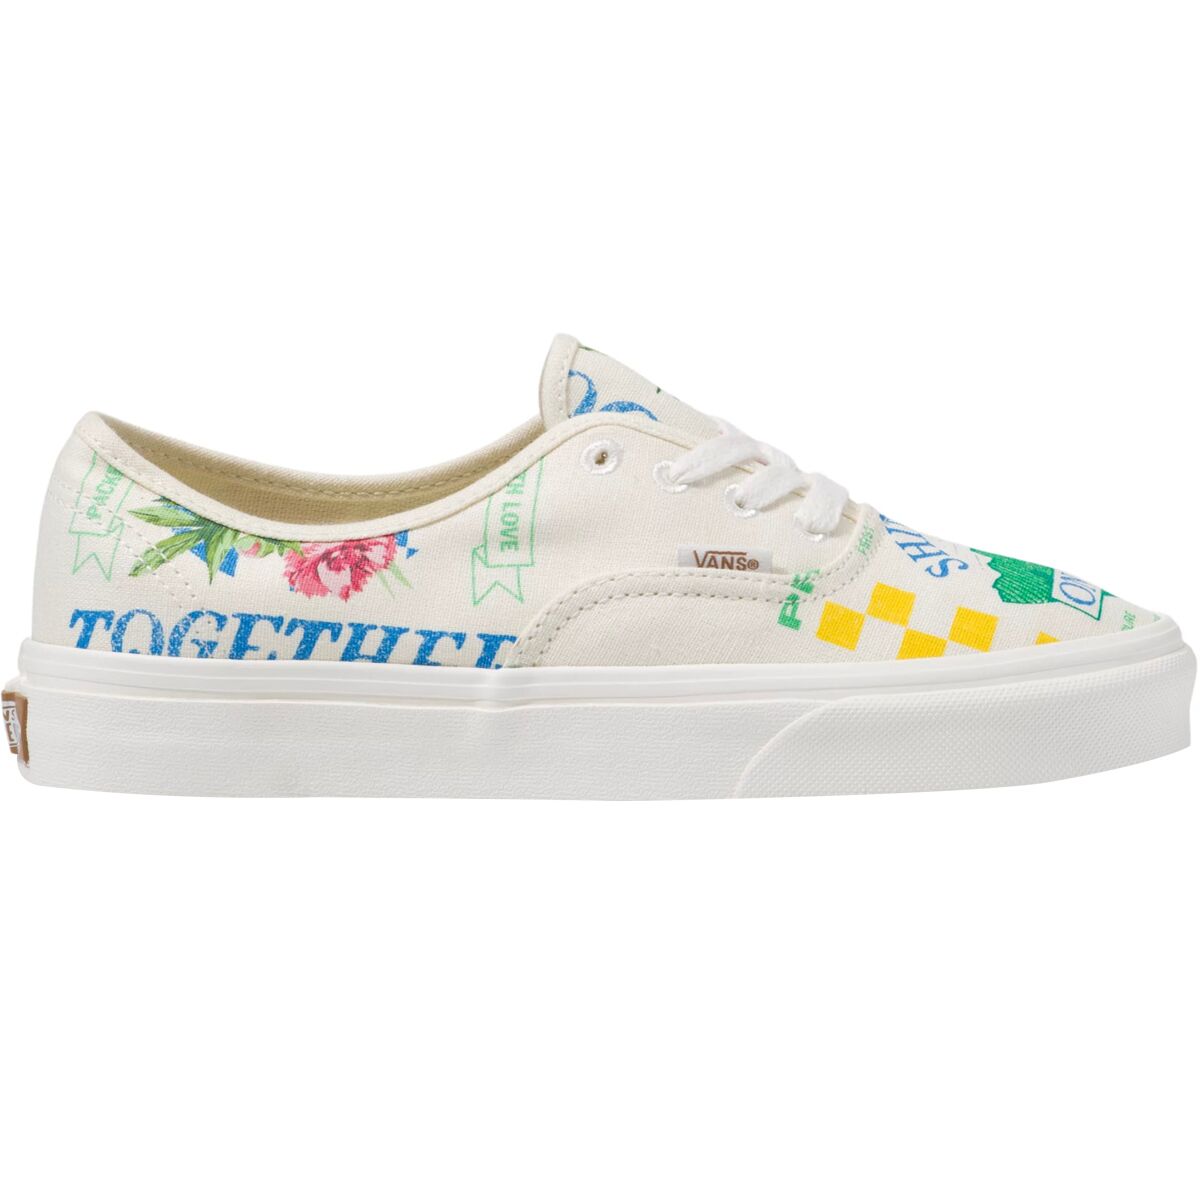 Vans Authentic Shoe - Eco Theory Pack